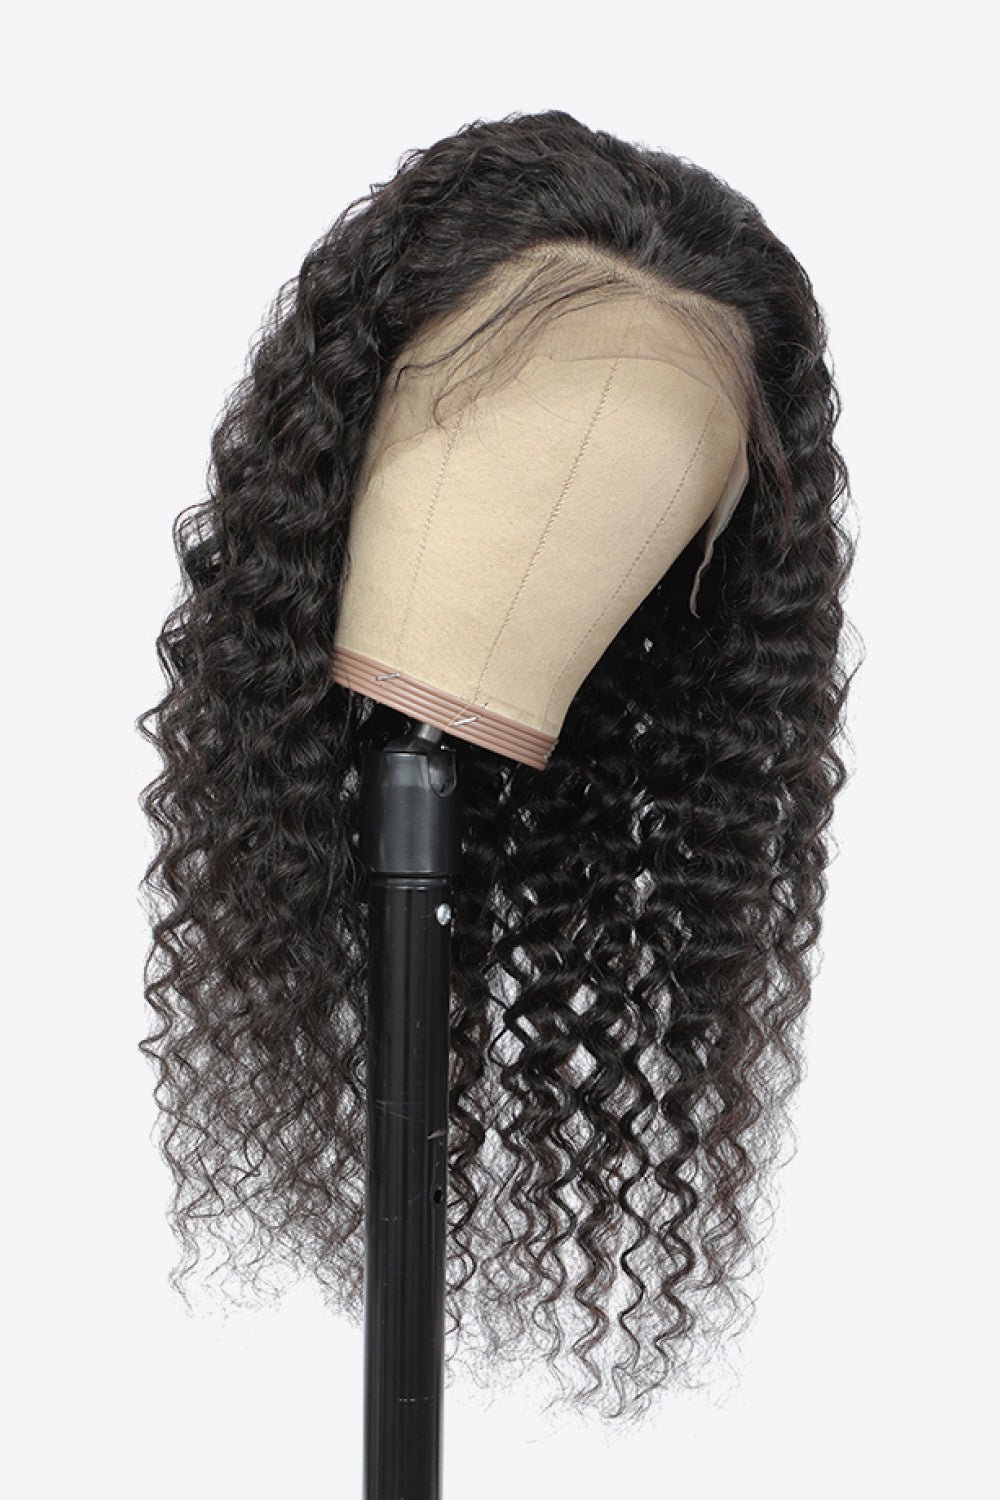 20” 13x4“ Lace Front Wigs Human Hair Curly Natural Color 150% Density - PINKCOLADA-Beauty-100100533207283